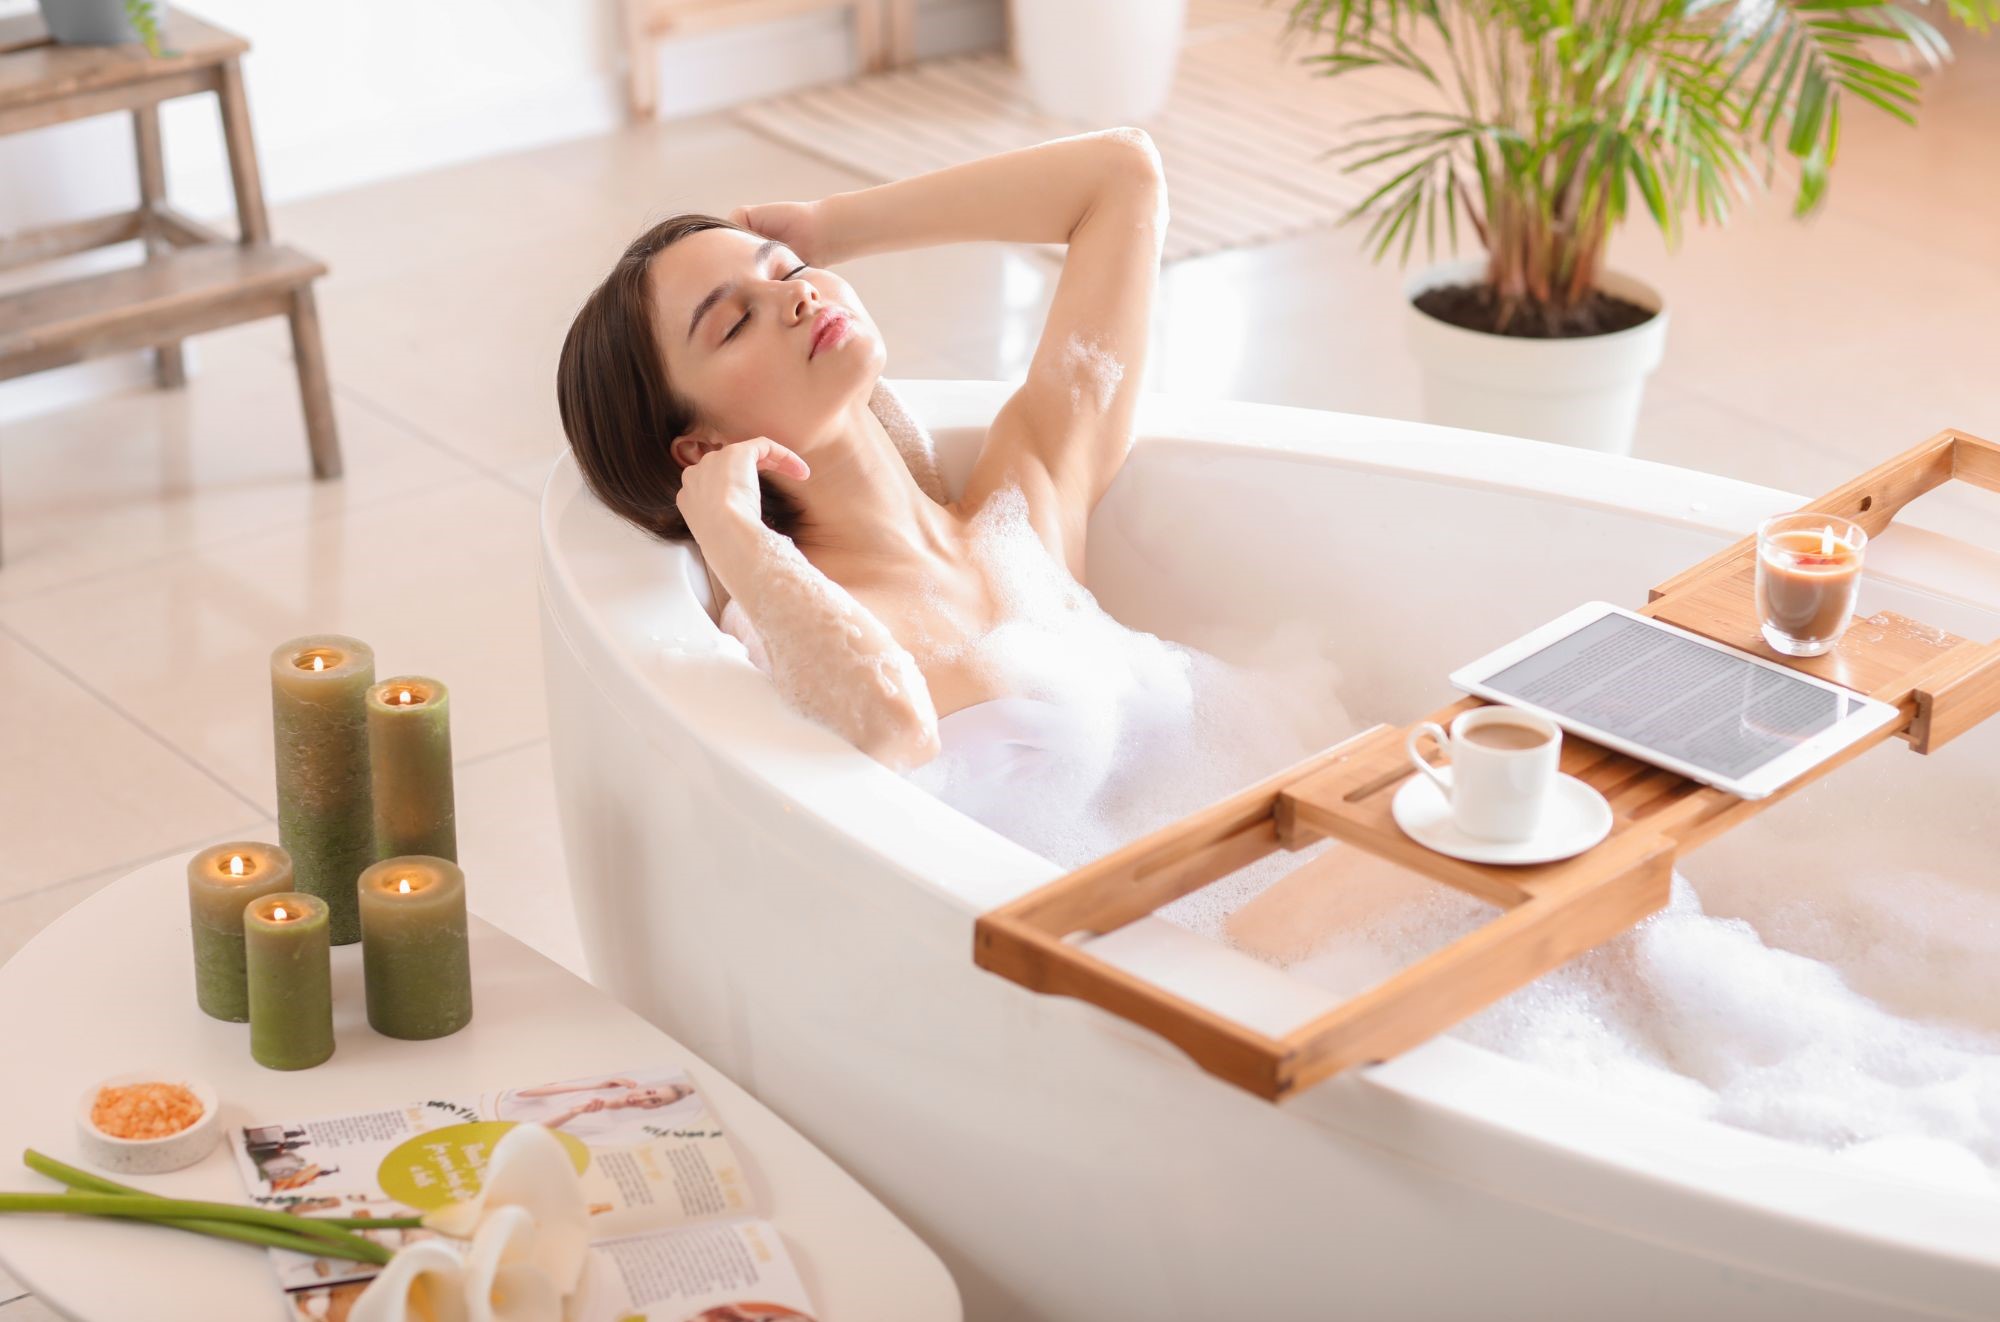 Make your baths relaxing again! Laser hair removal means no more painful shaving in the tub.